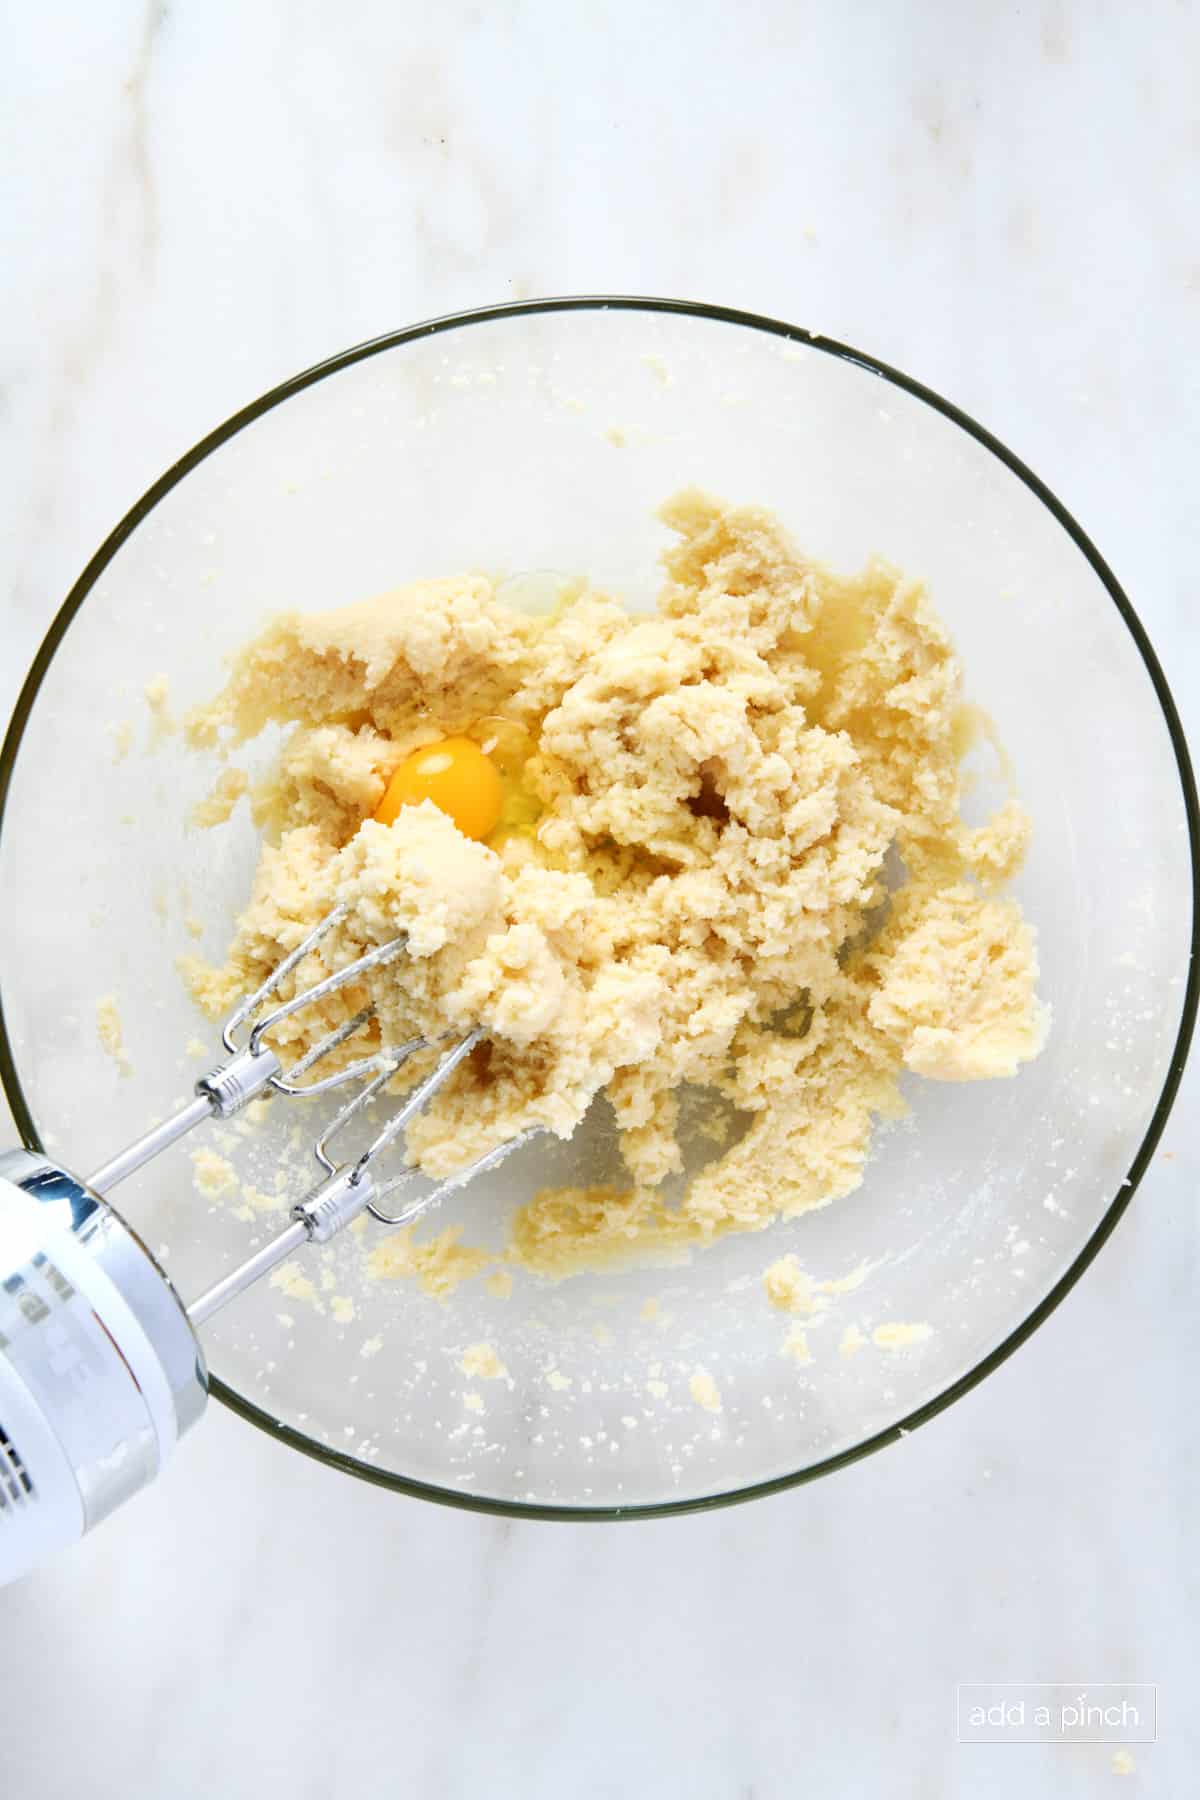 Egg added to sugar cookie dough in a glass bowl with hand mixer.